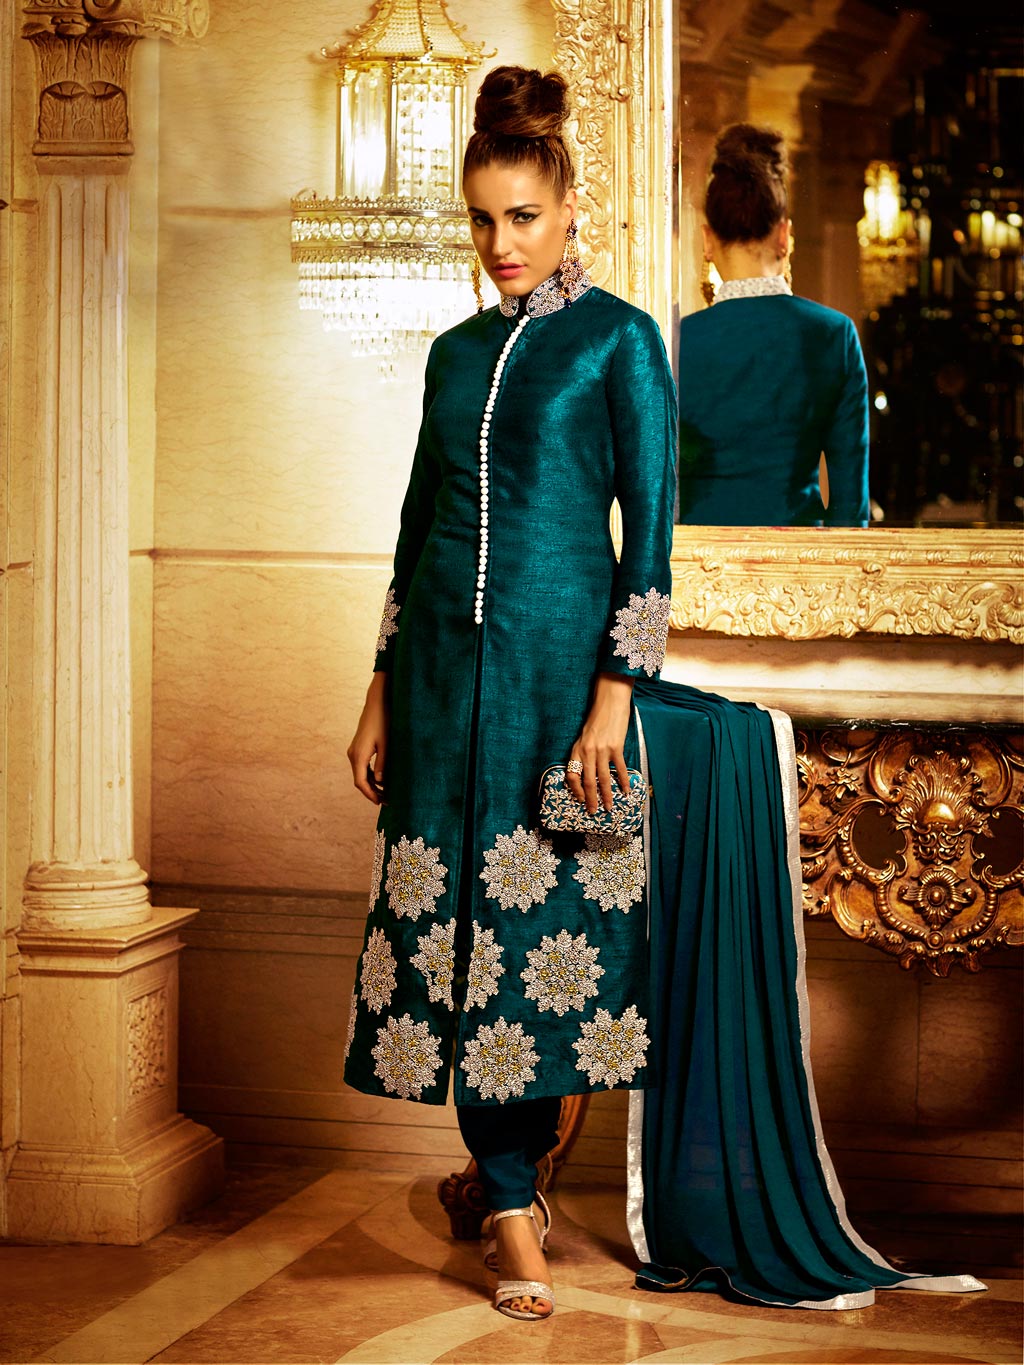 THANKAR BLACK BHAGALPURI SILK WITH EMBROIDERY STRAIGHT SUIT @ 31% OFF Rs  2224.00 Only FREE Shipping + Extra Discount - Bhagalpuri Suit, Buy Bhagalpuri  Suit Online, Semi-stitched Suit, palazzo Style Suit, Buy